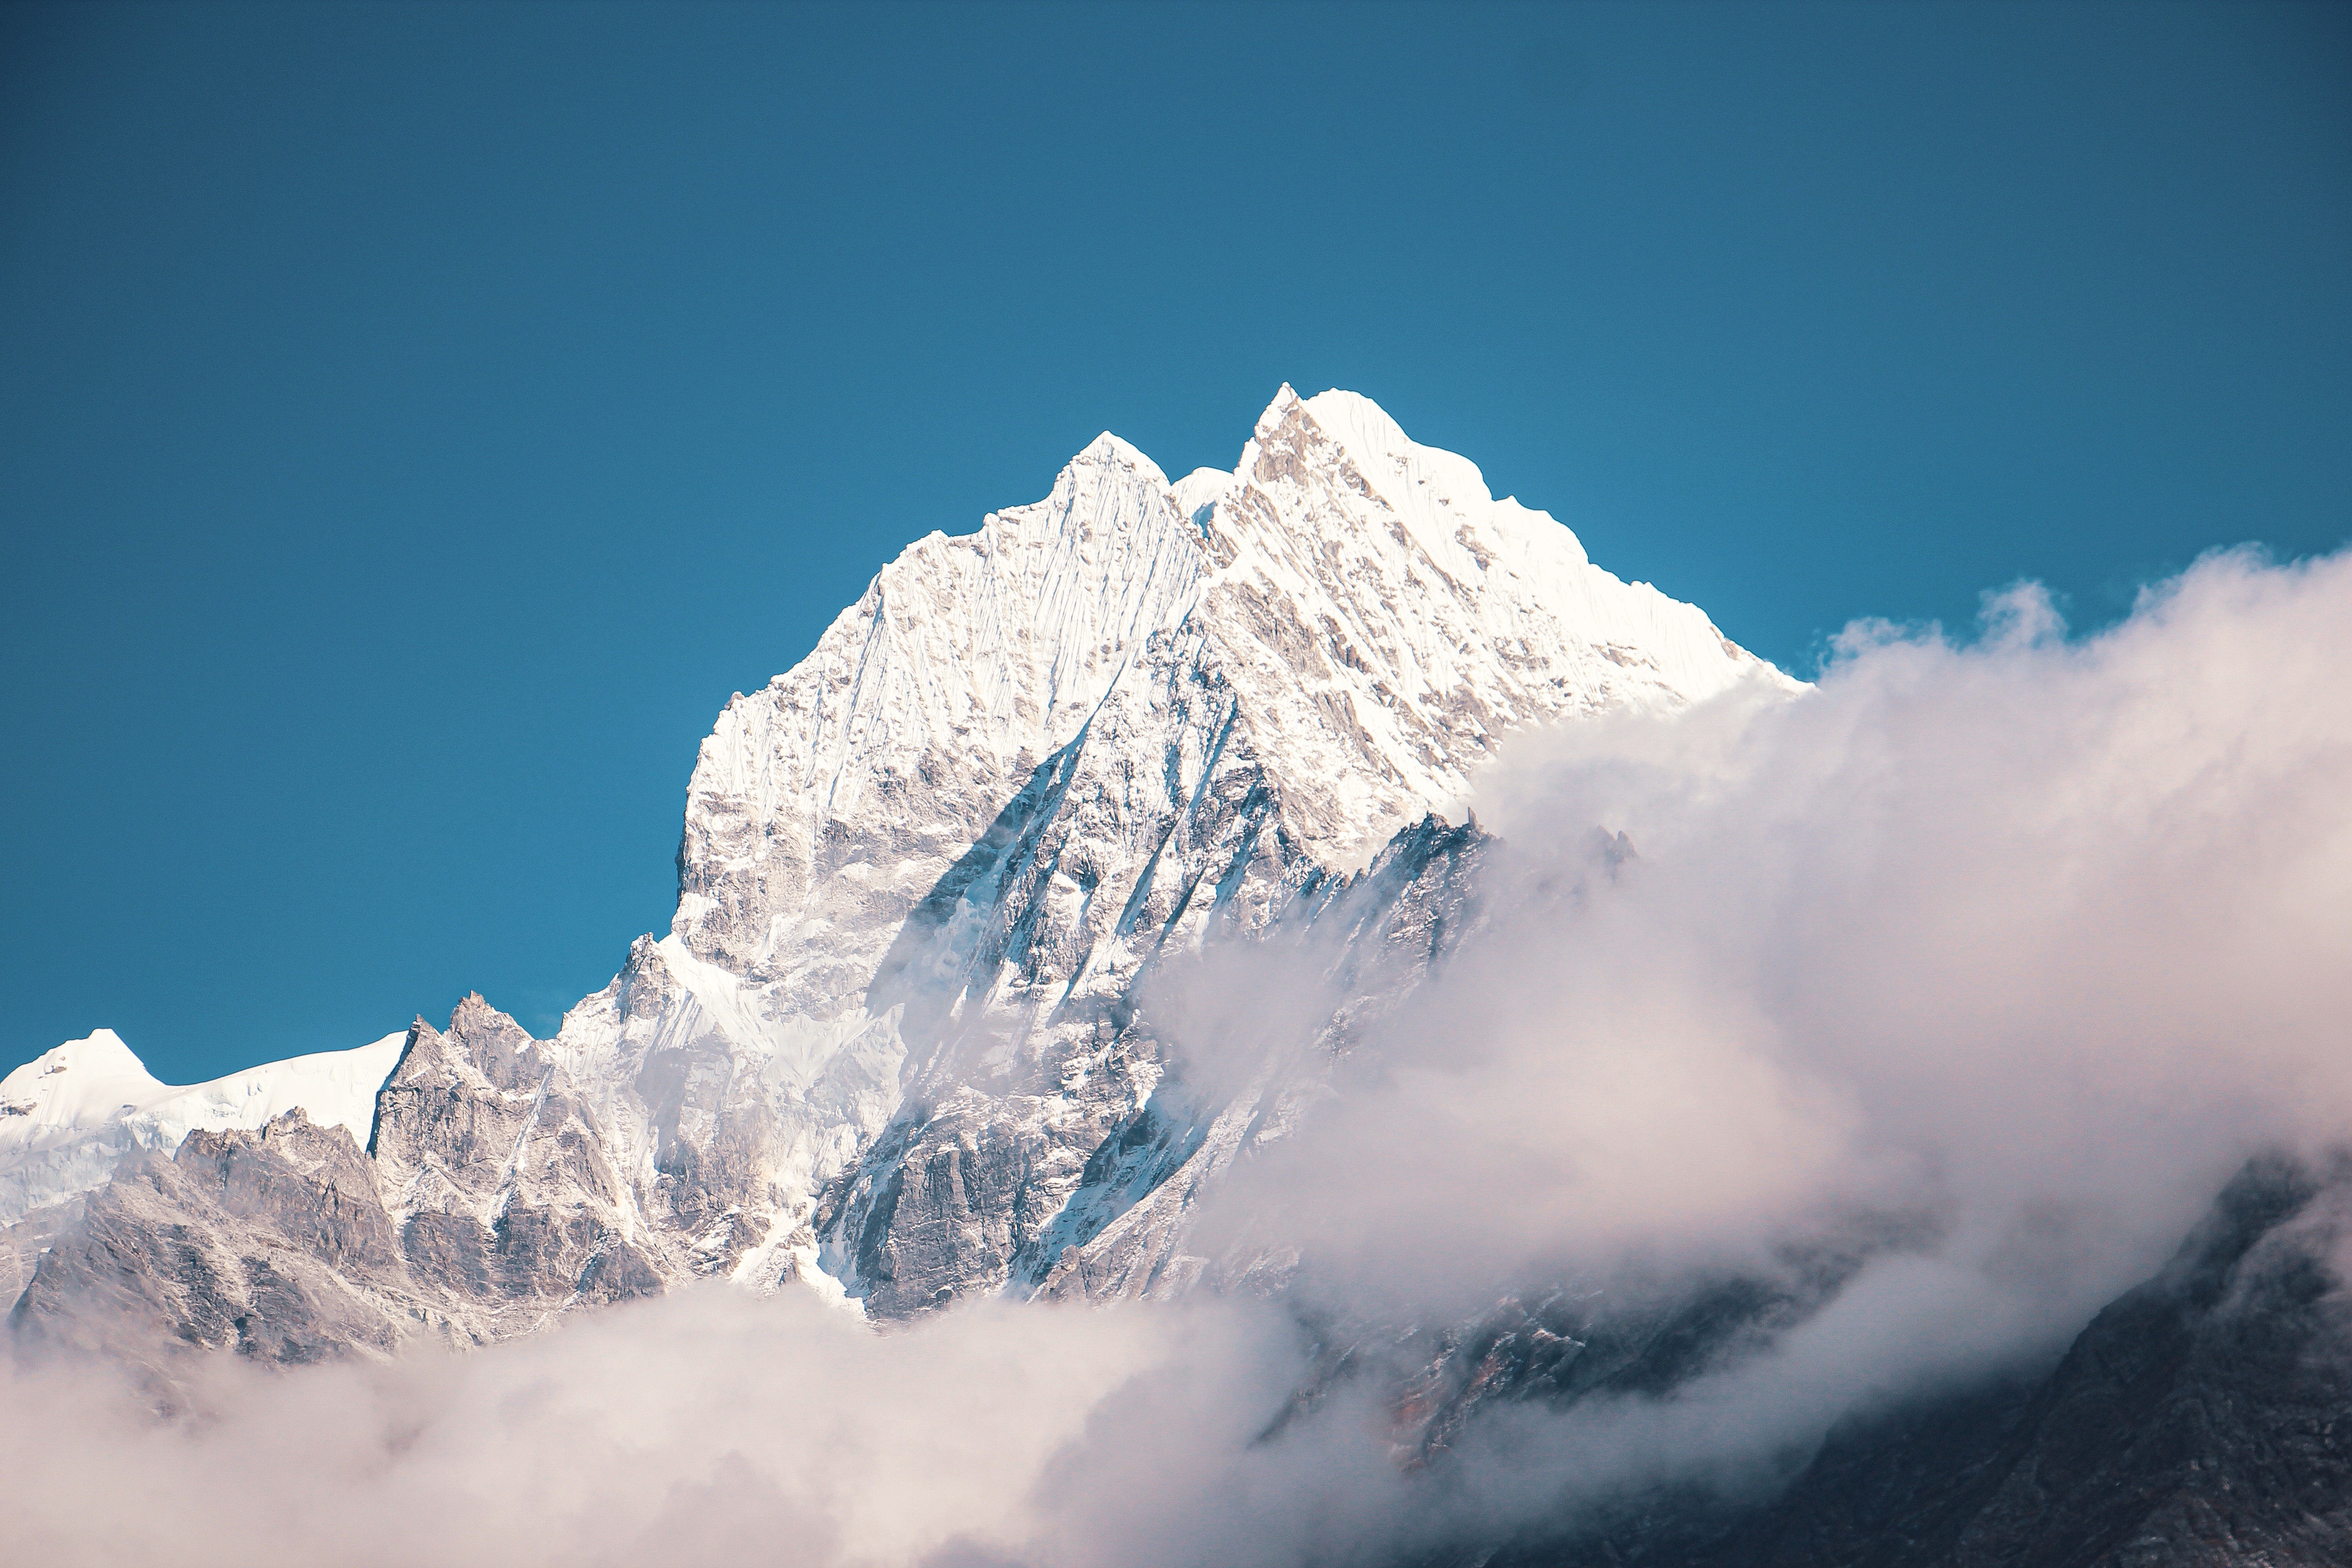 Best Free Mount Everest & Image · 100% Royalty Free HD Downloads